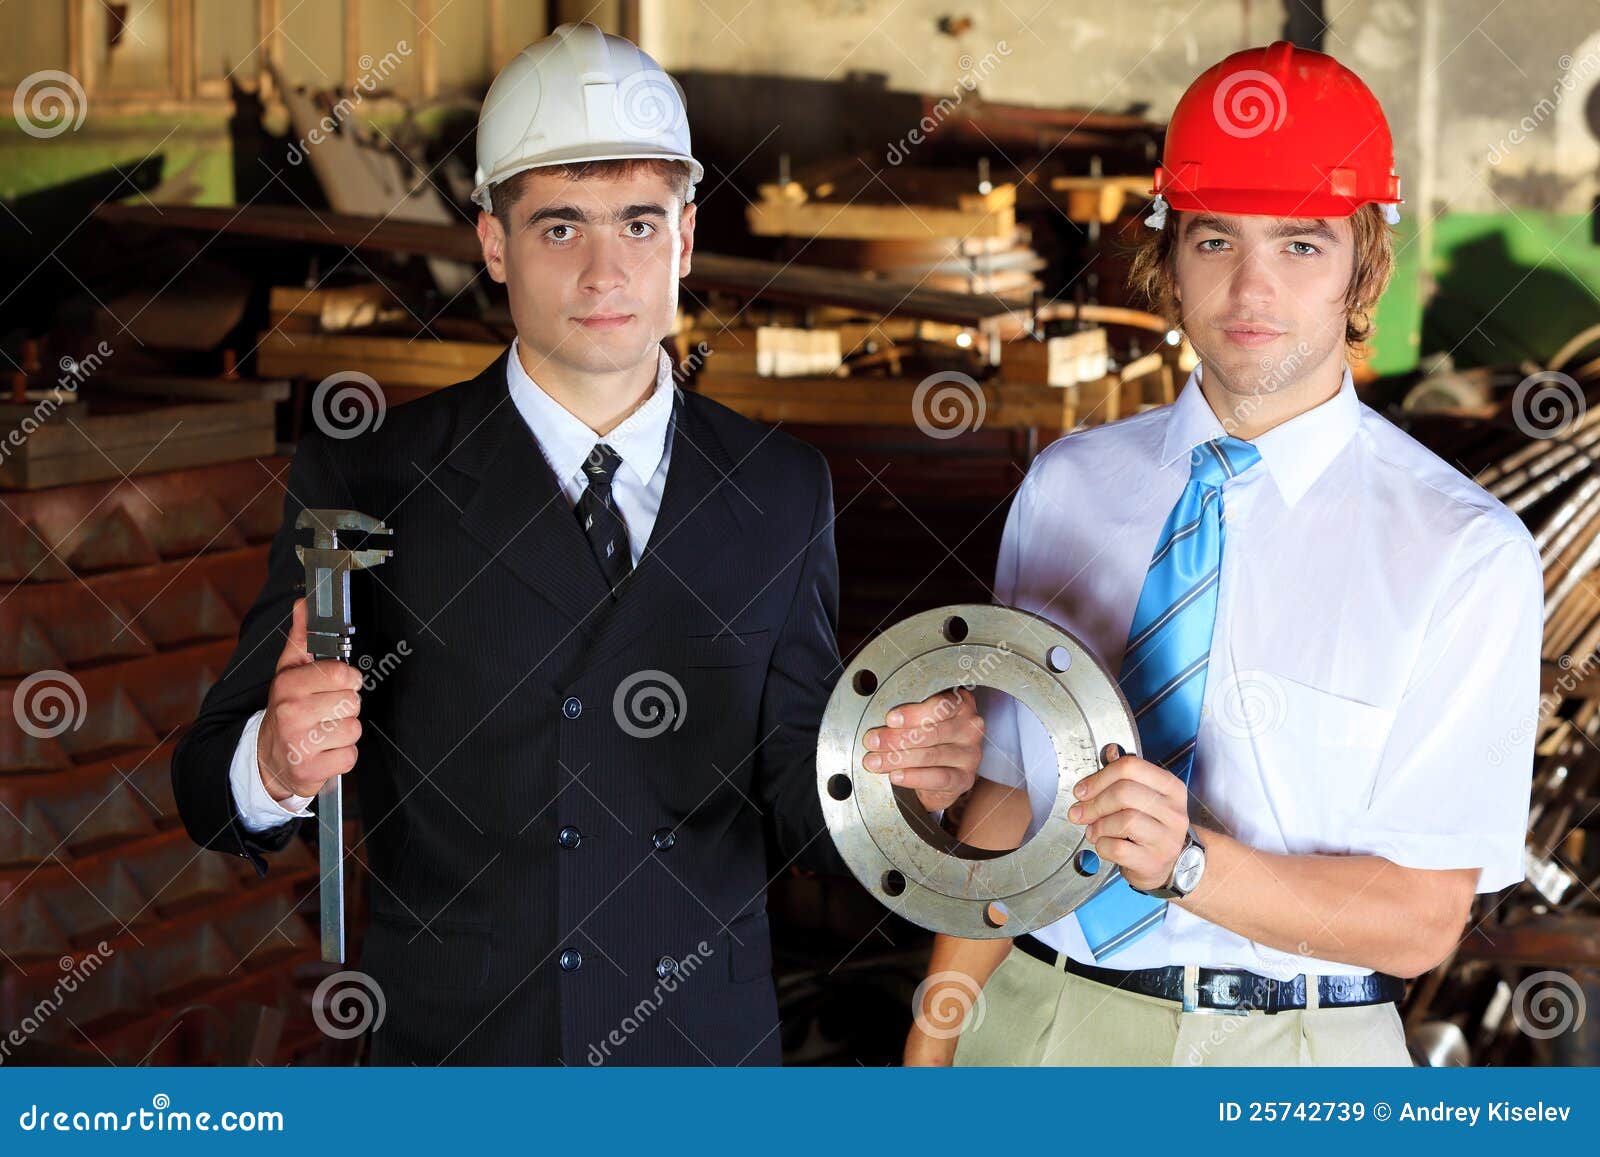 Industrial business stock image. Image of consultant ...
